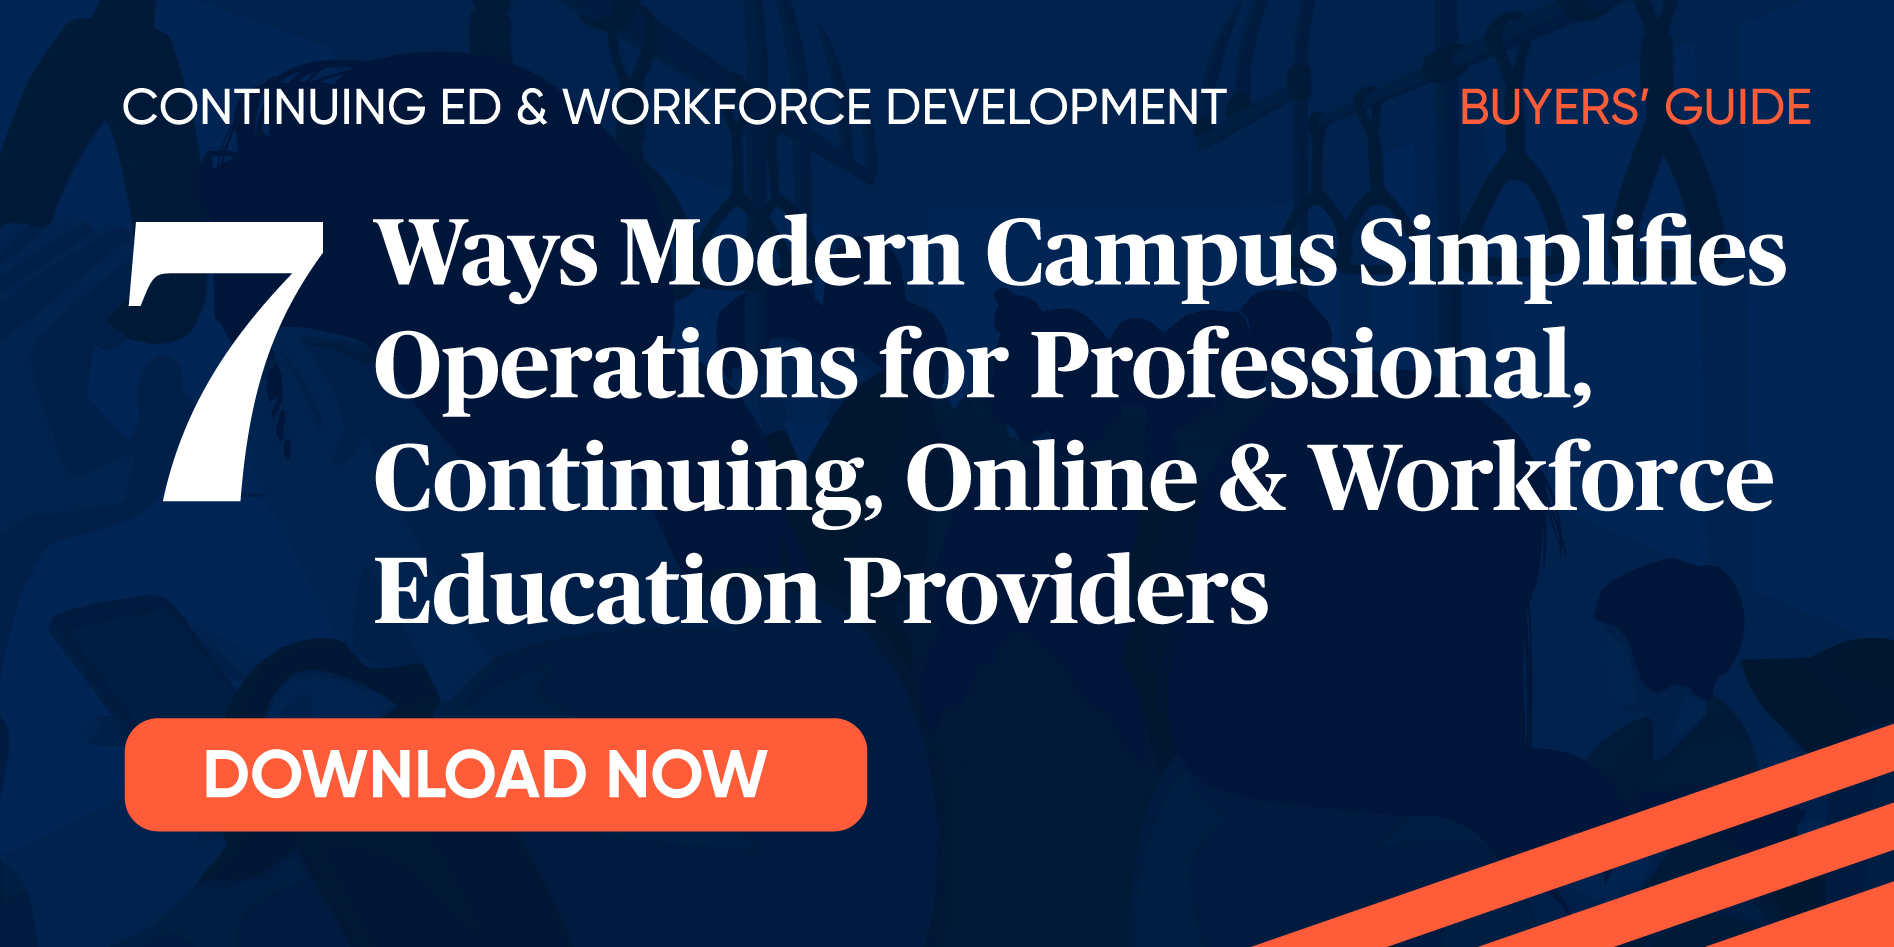 7 Ways Modern Campus Simplifies Operations for Professional, Continuing, Online & Workforce Education Providers